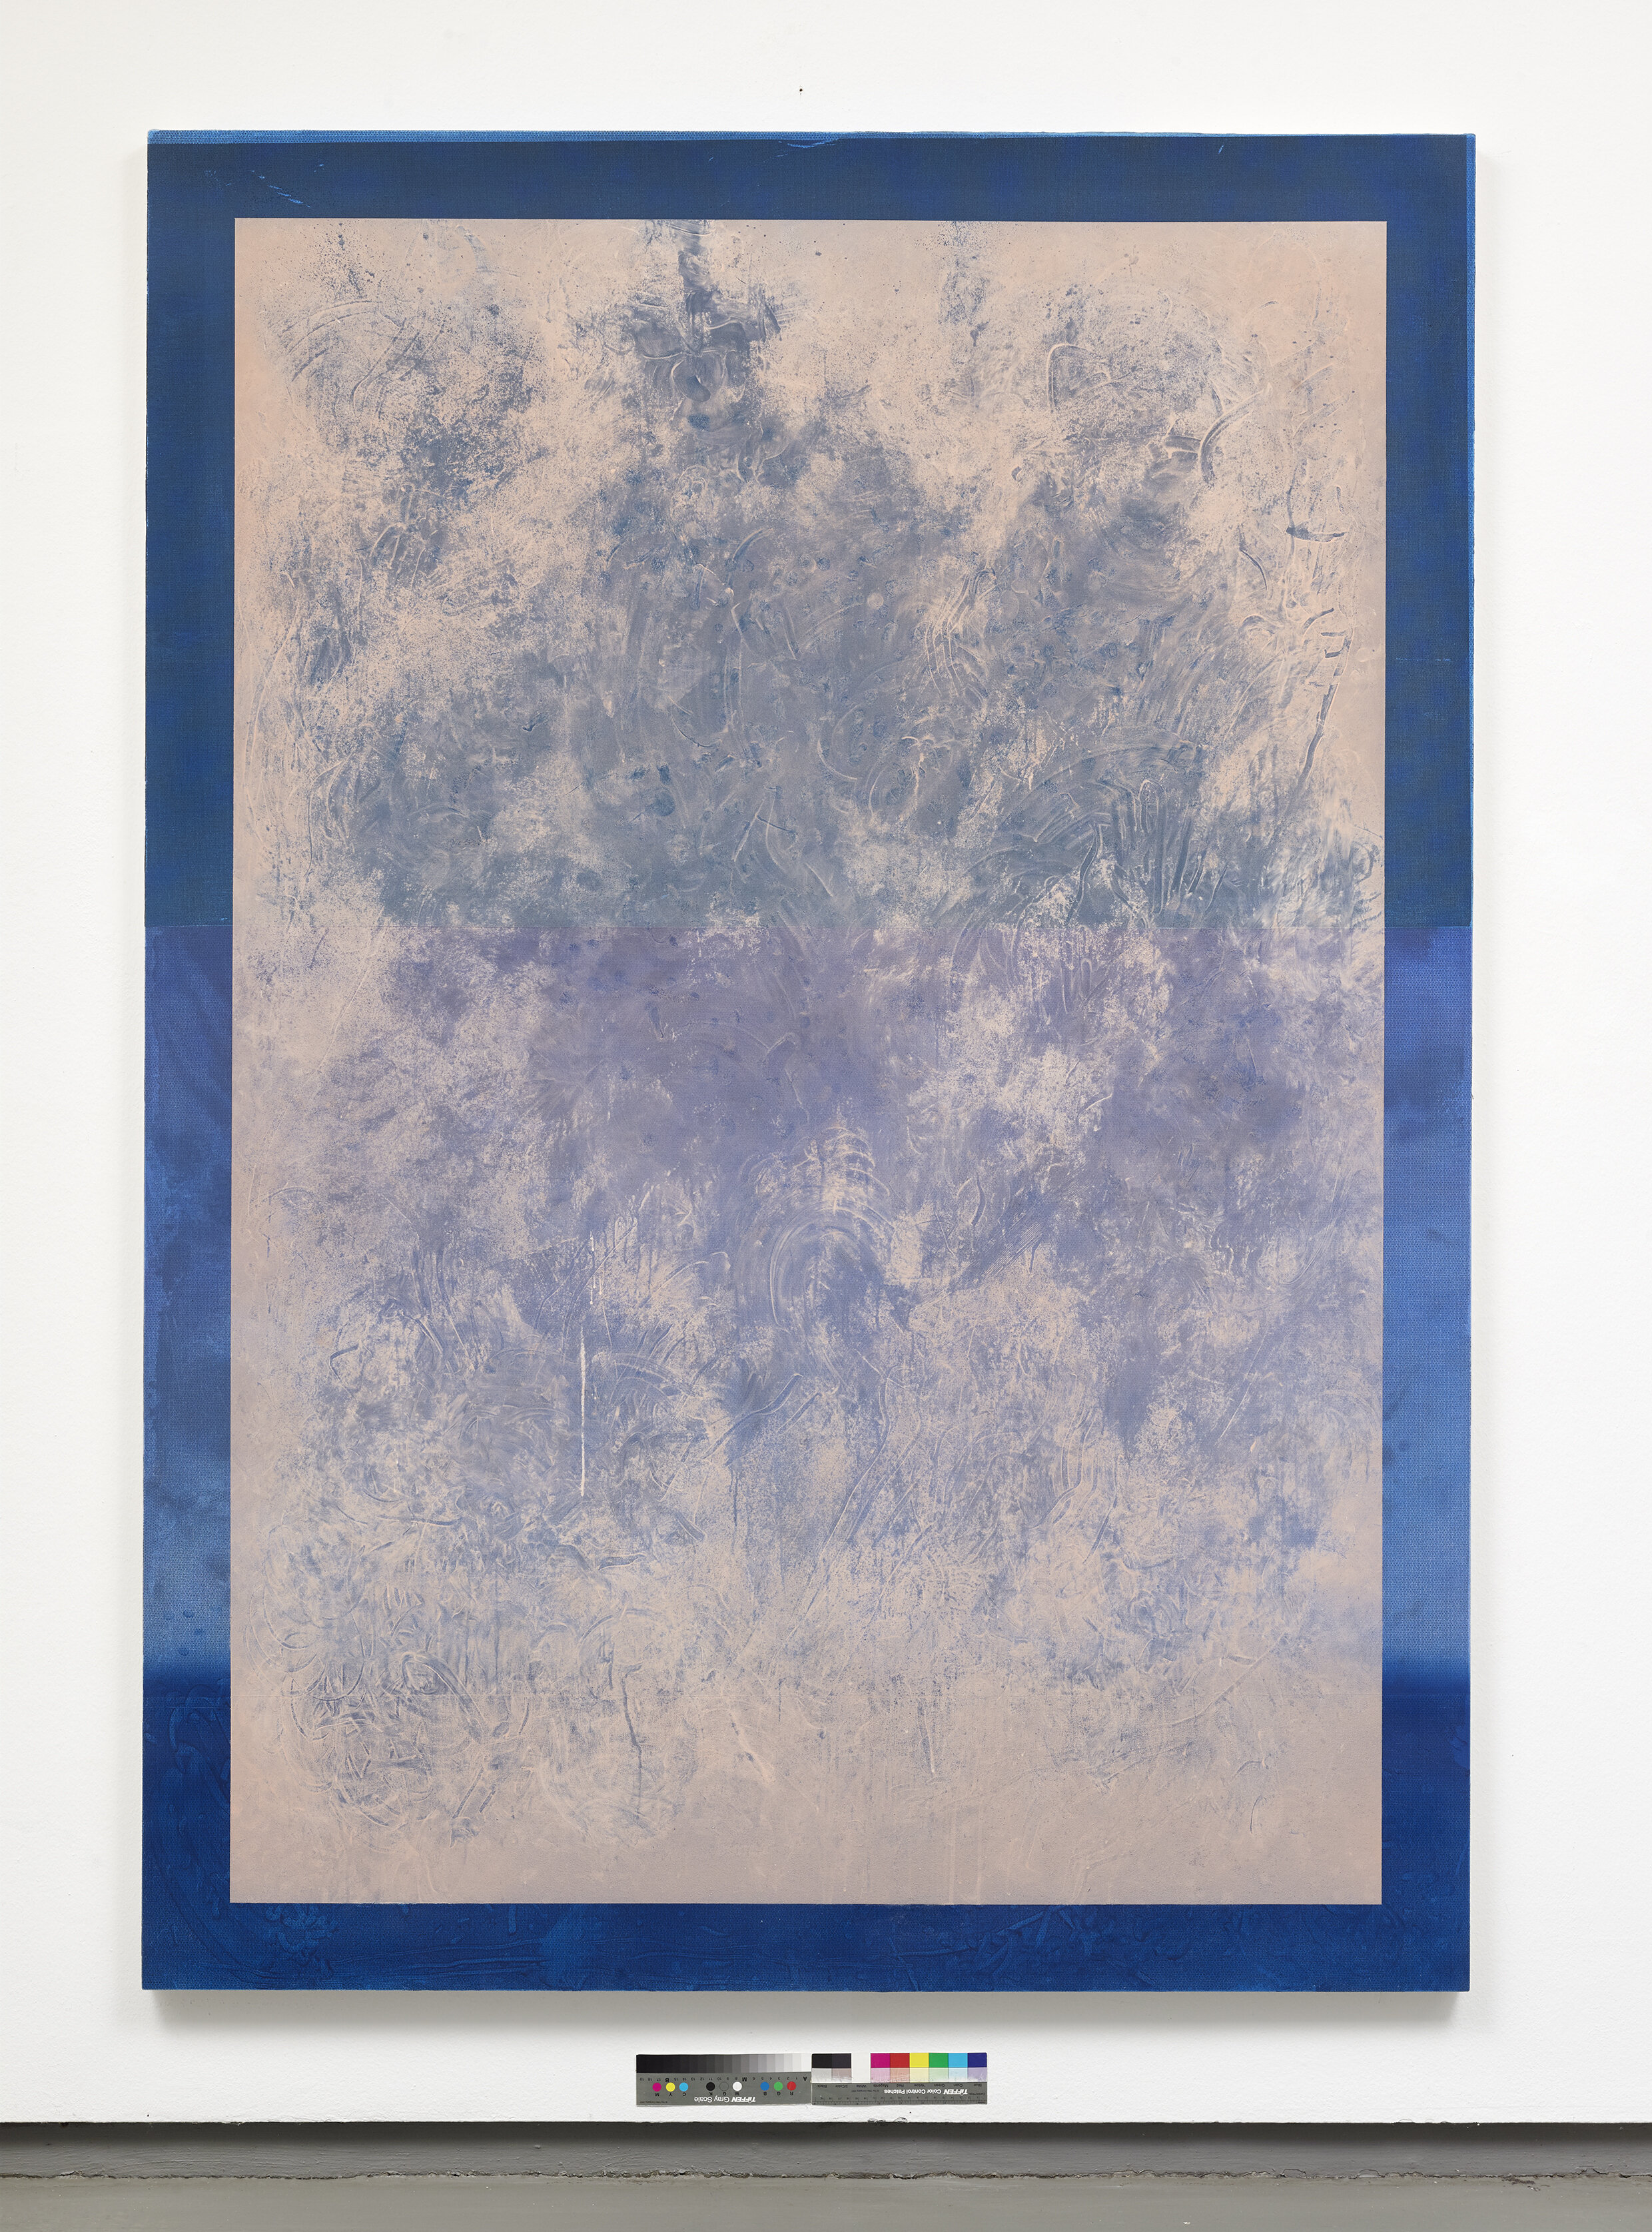   Dust Painting: Pink Over Blue in 3 Shades,  2015. Toner, acrylic and oil on canvas. 84 x 60 inches 